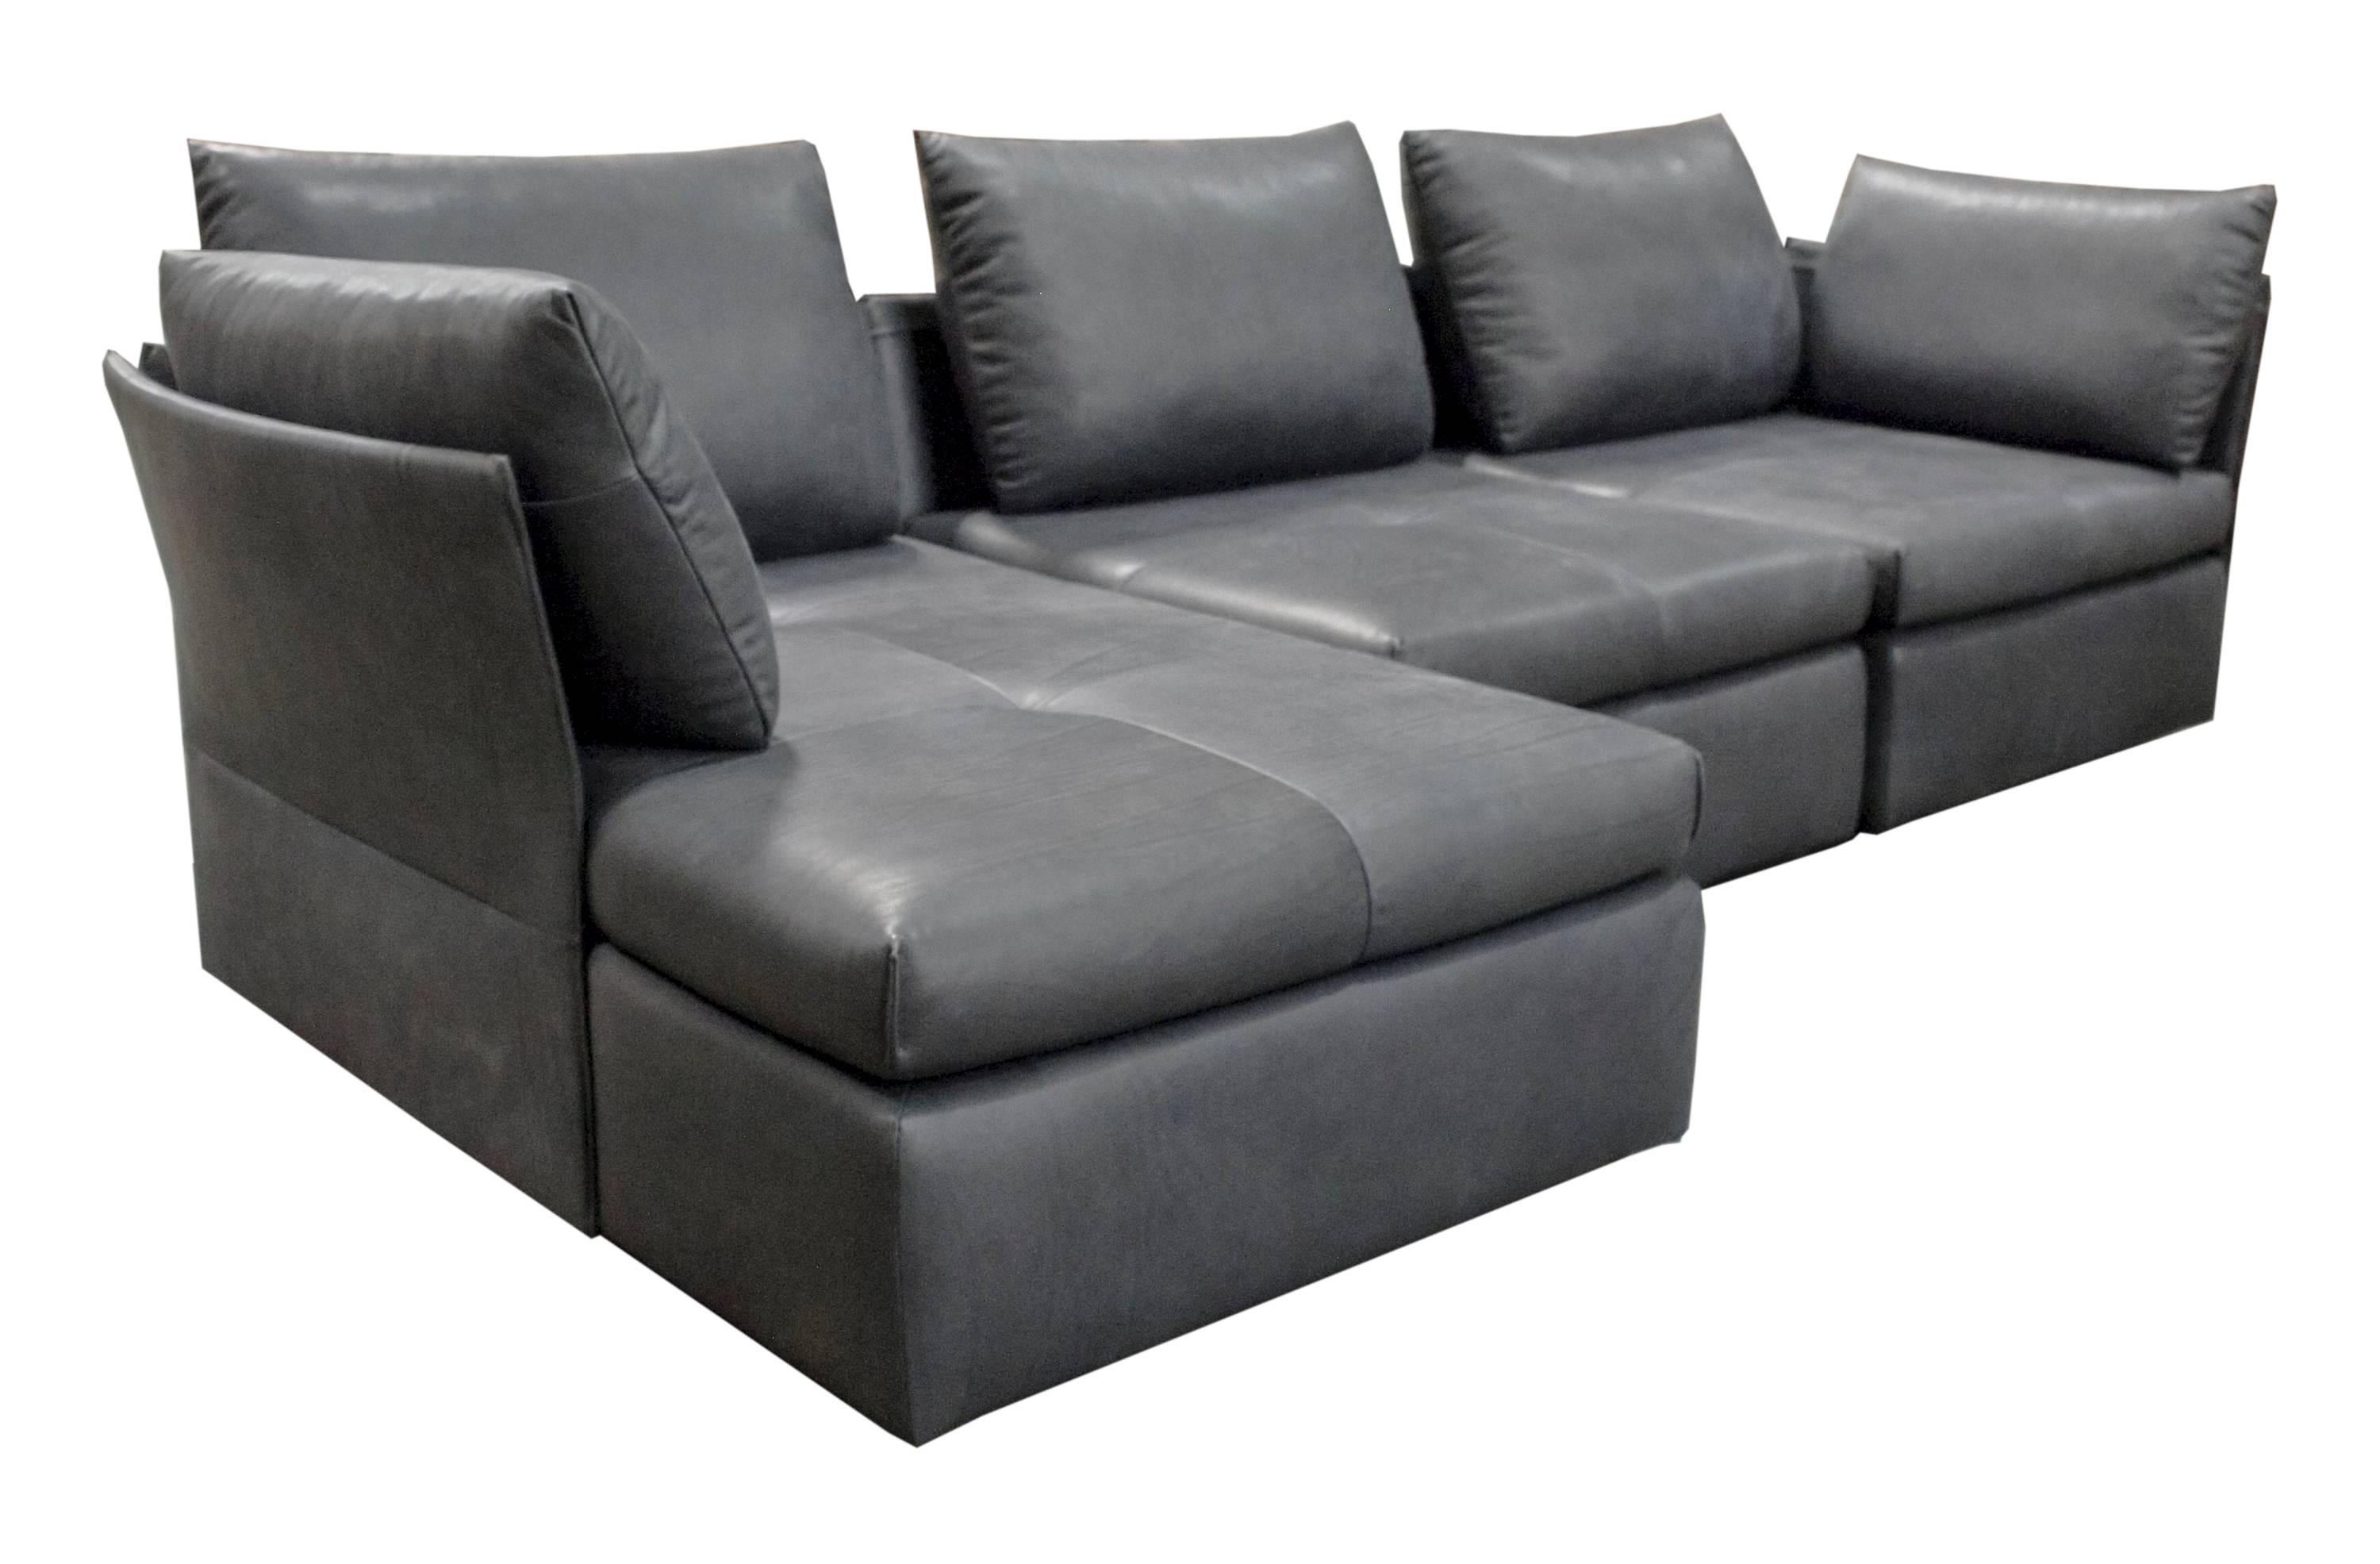 DS-19 de Sede sofa designed by Christian Werner in black natural leather.

Solid wood construction, backs with flat steel profiles.
Seat with webbing under-springing.
SEDEX upholstery with Dacron covering.
Back and armrest cushions: